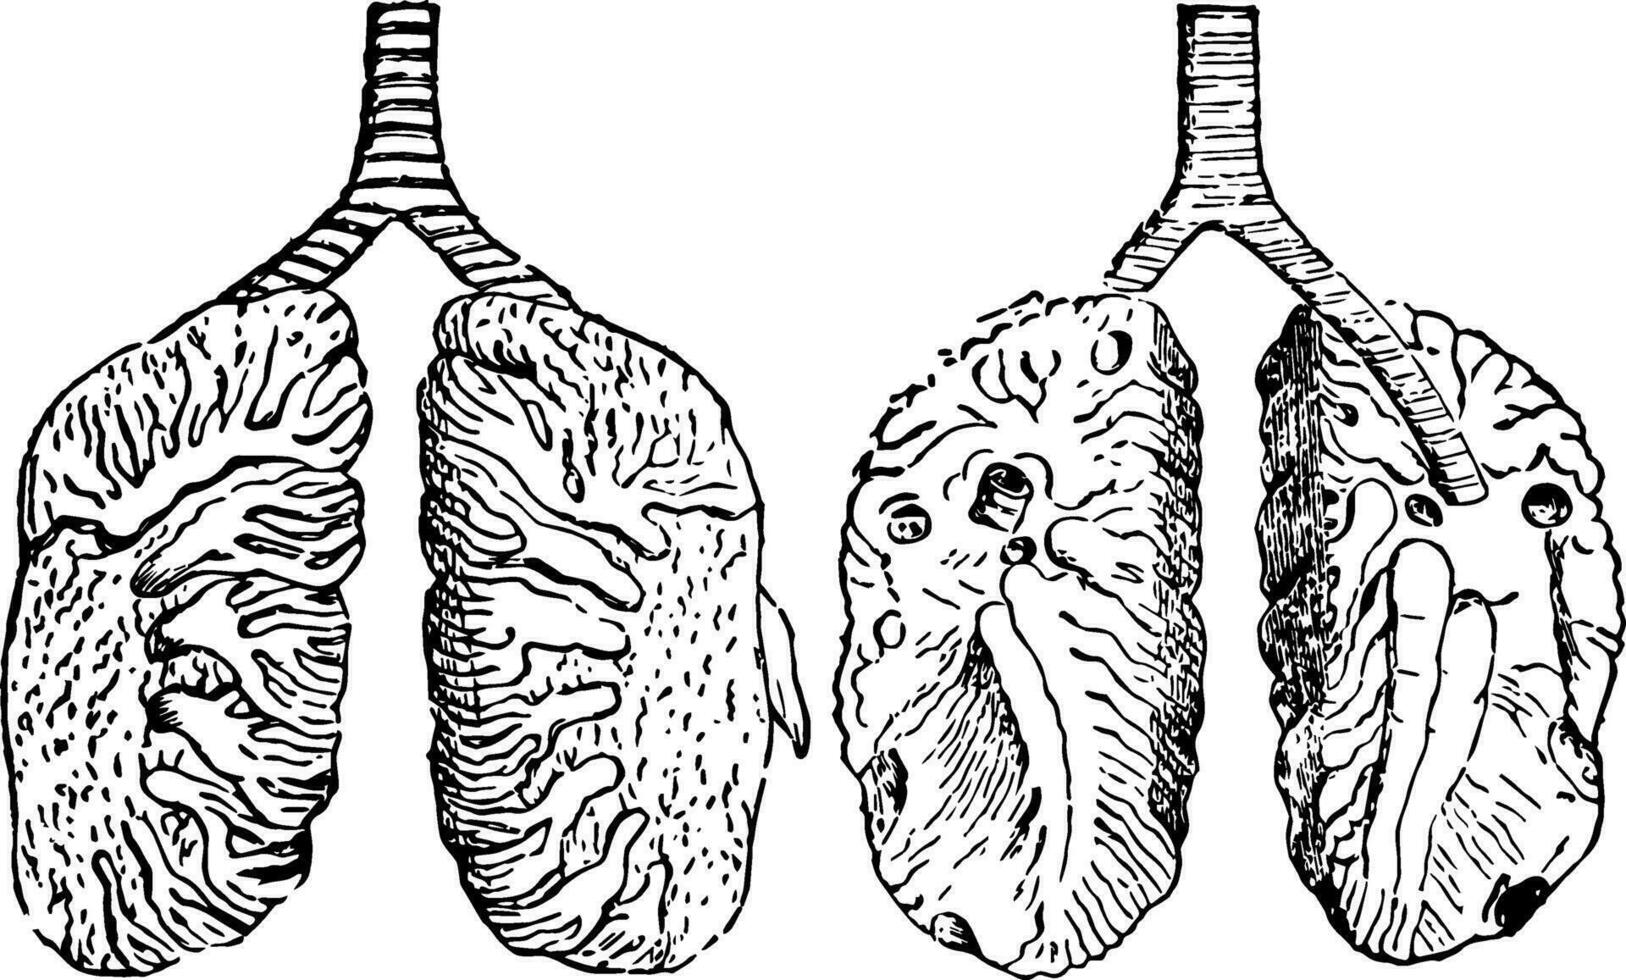 Lungs of a Pigeon, vintage illustration. vector